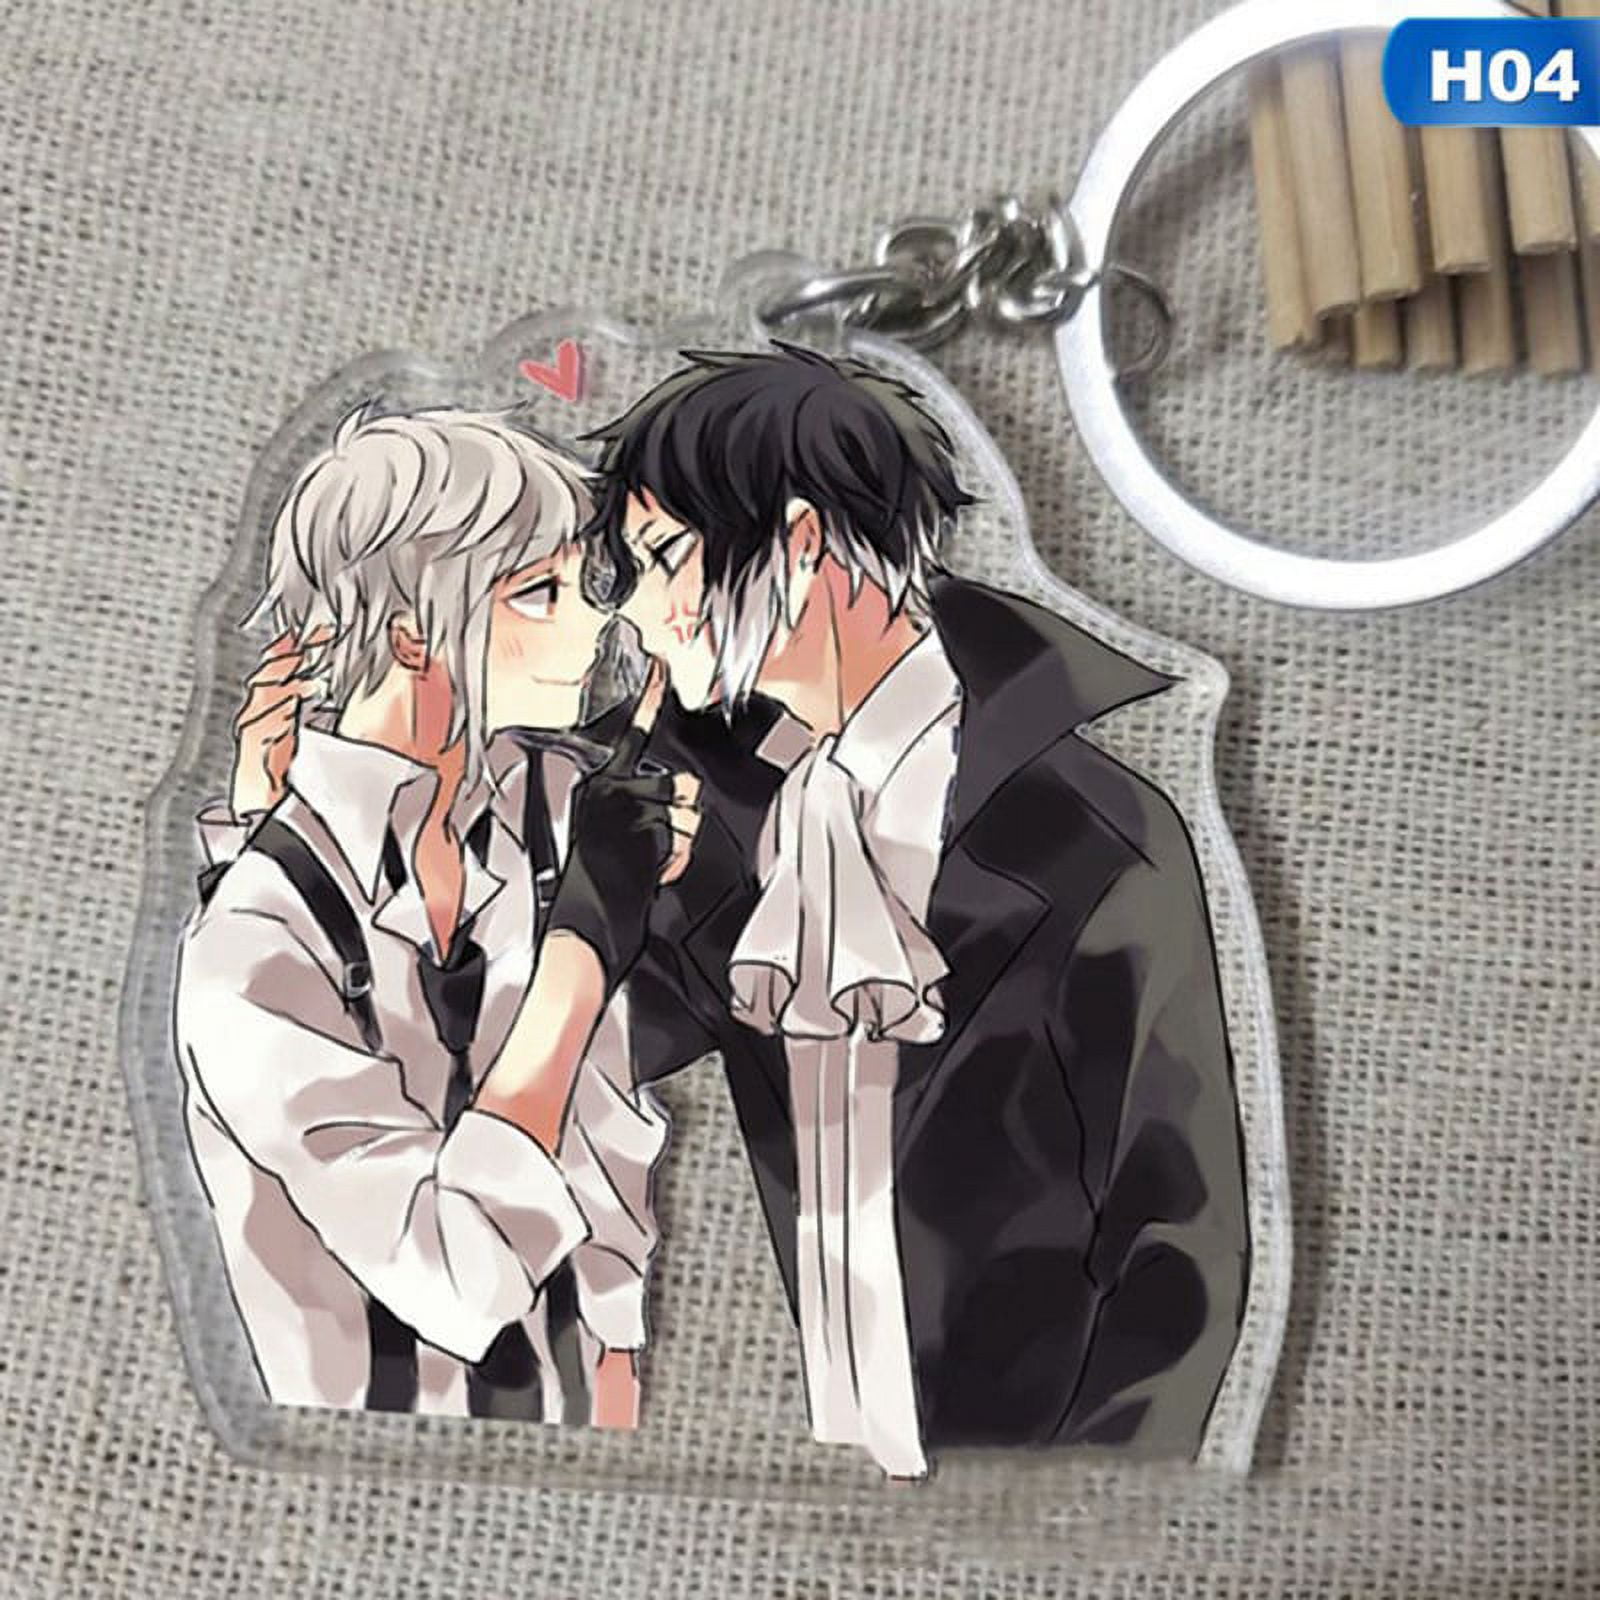 Riapawel Bungo Stray Dogs Keychain Double-sided Clear Acrylic Key Ring  Anime Figure Color Printed Pendant Clothing Bag Accessories